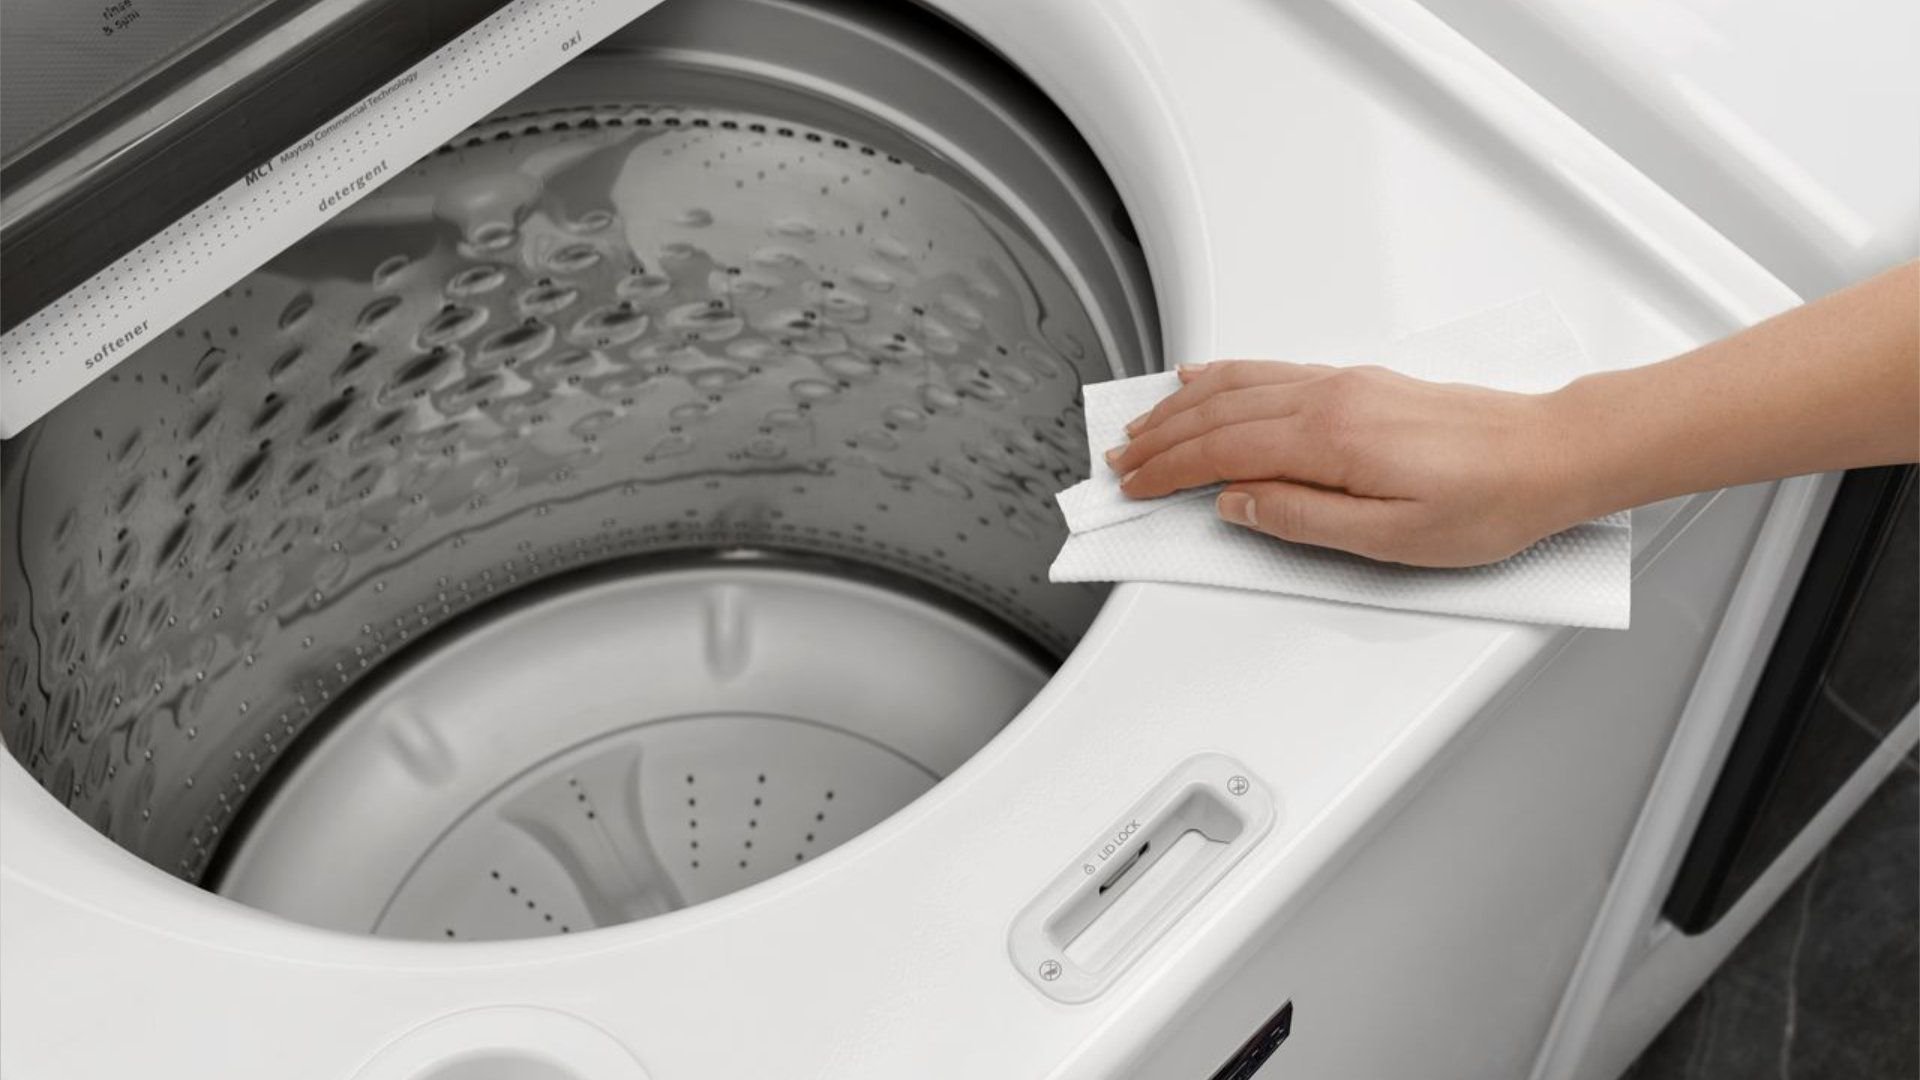 How to clean a washing machine efficiently